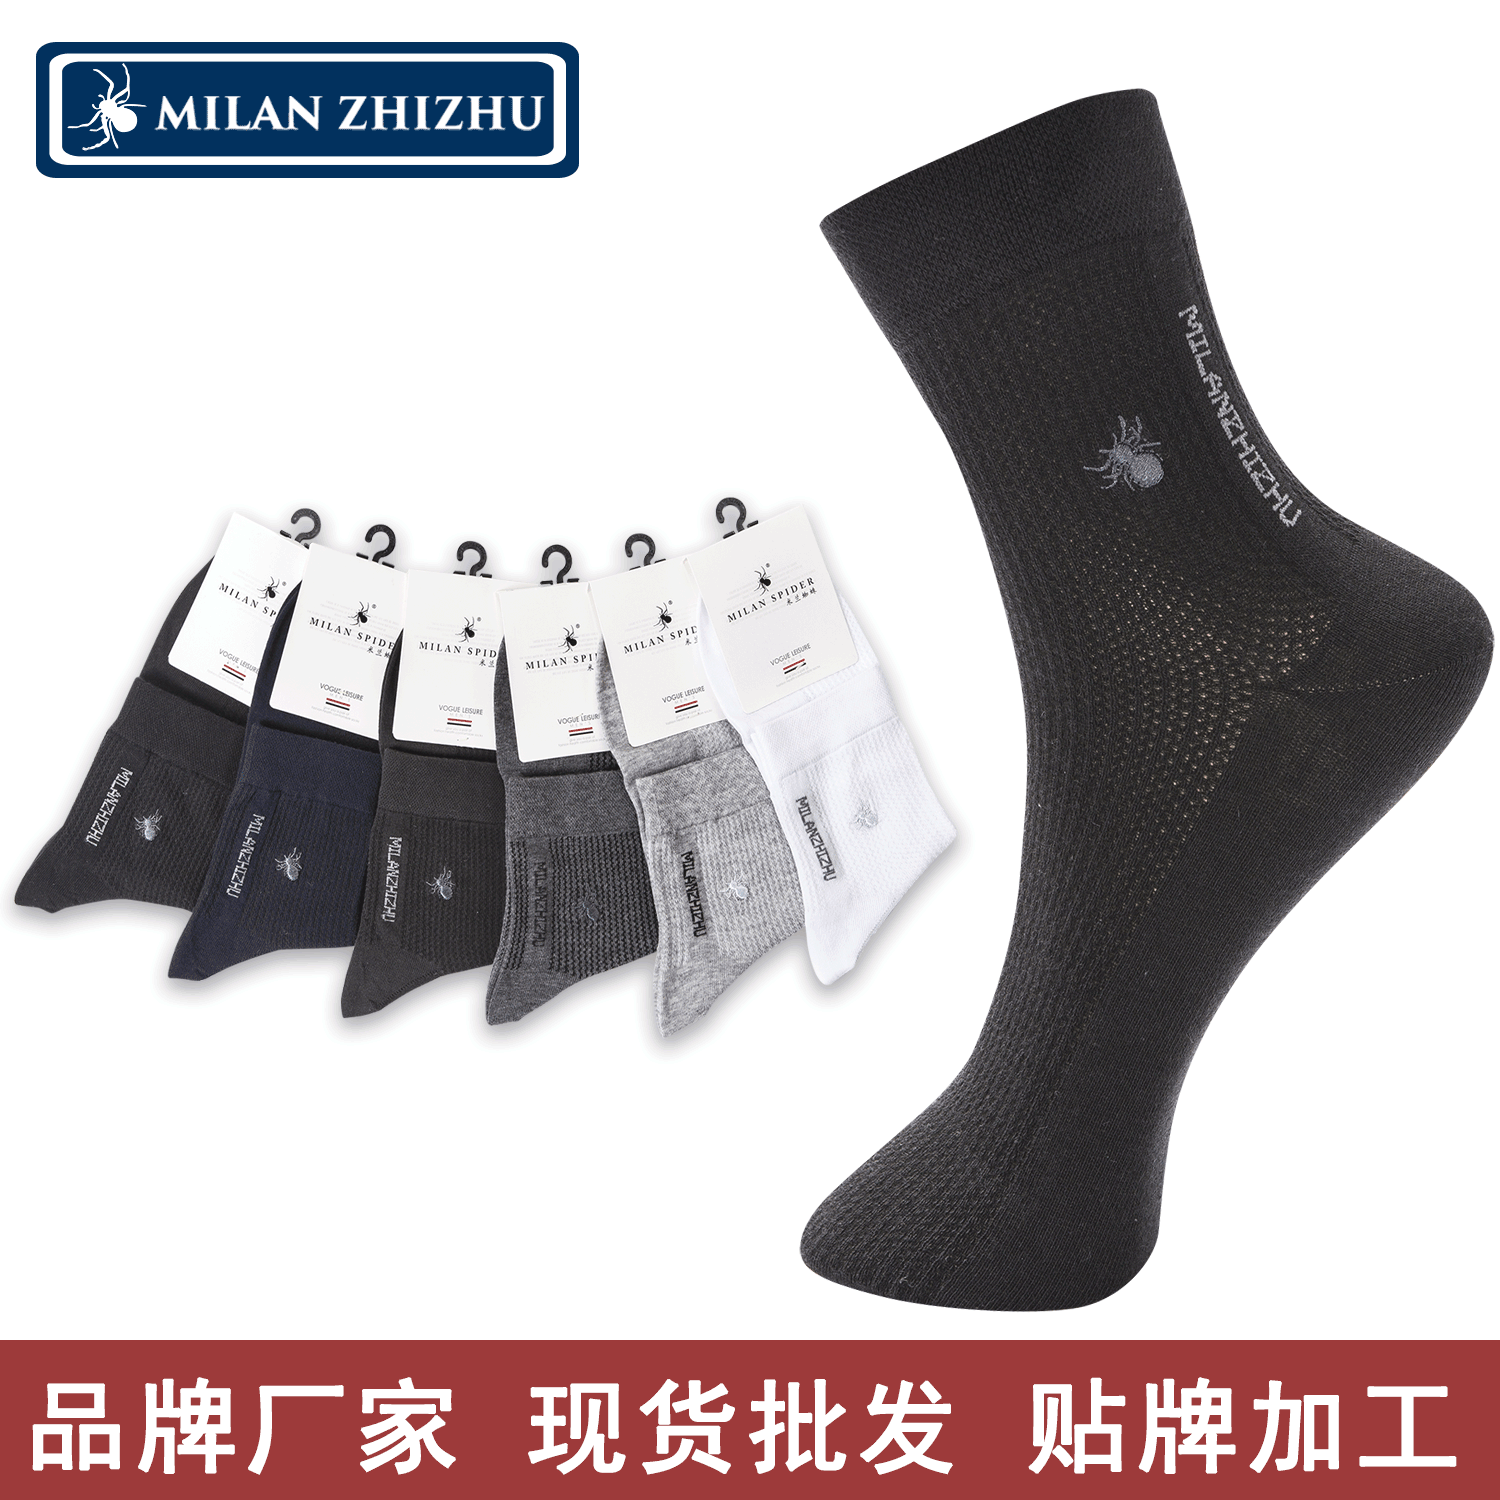 Male business solid color tube socks